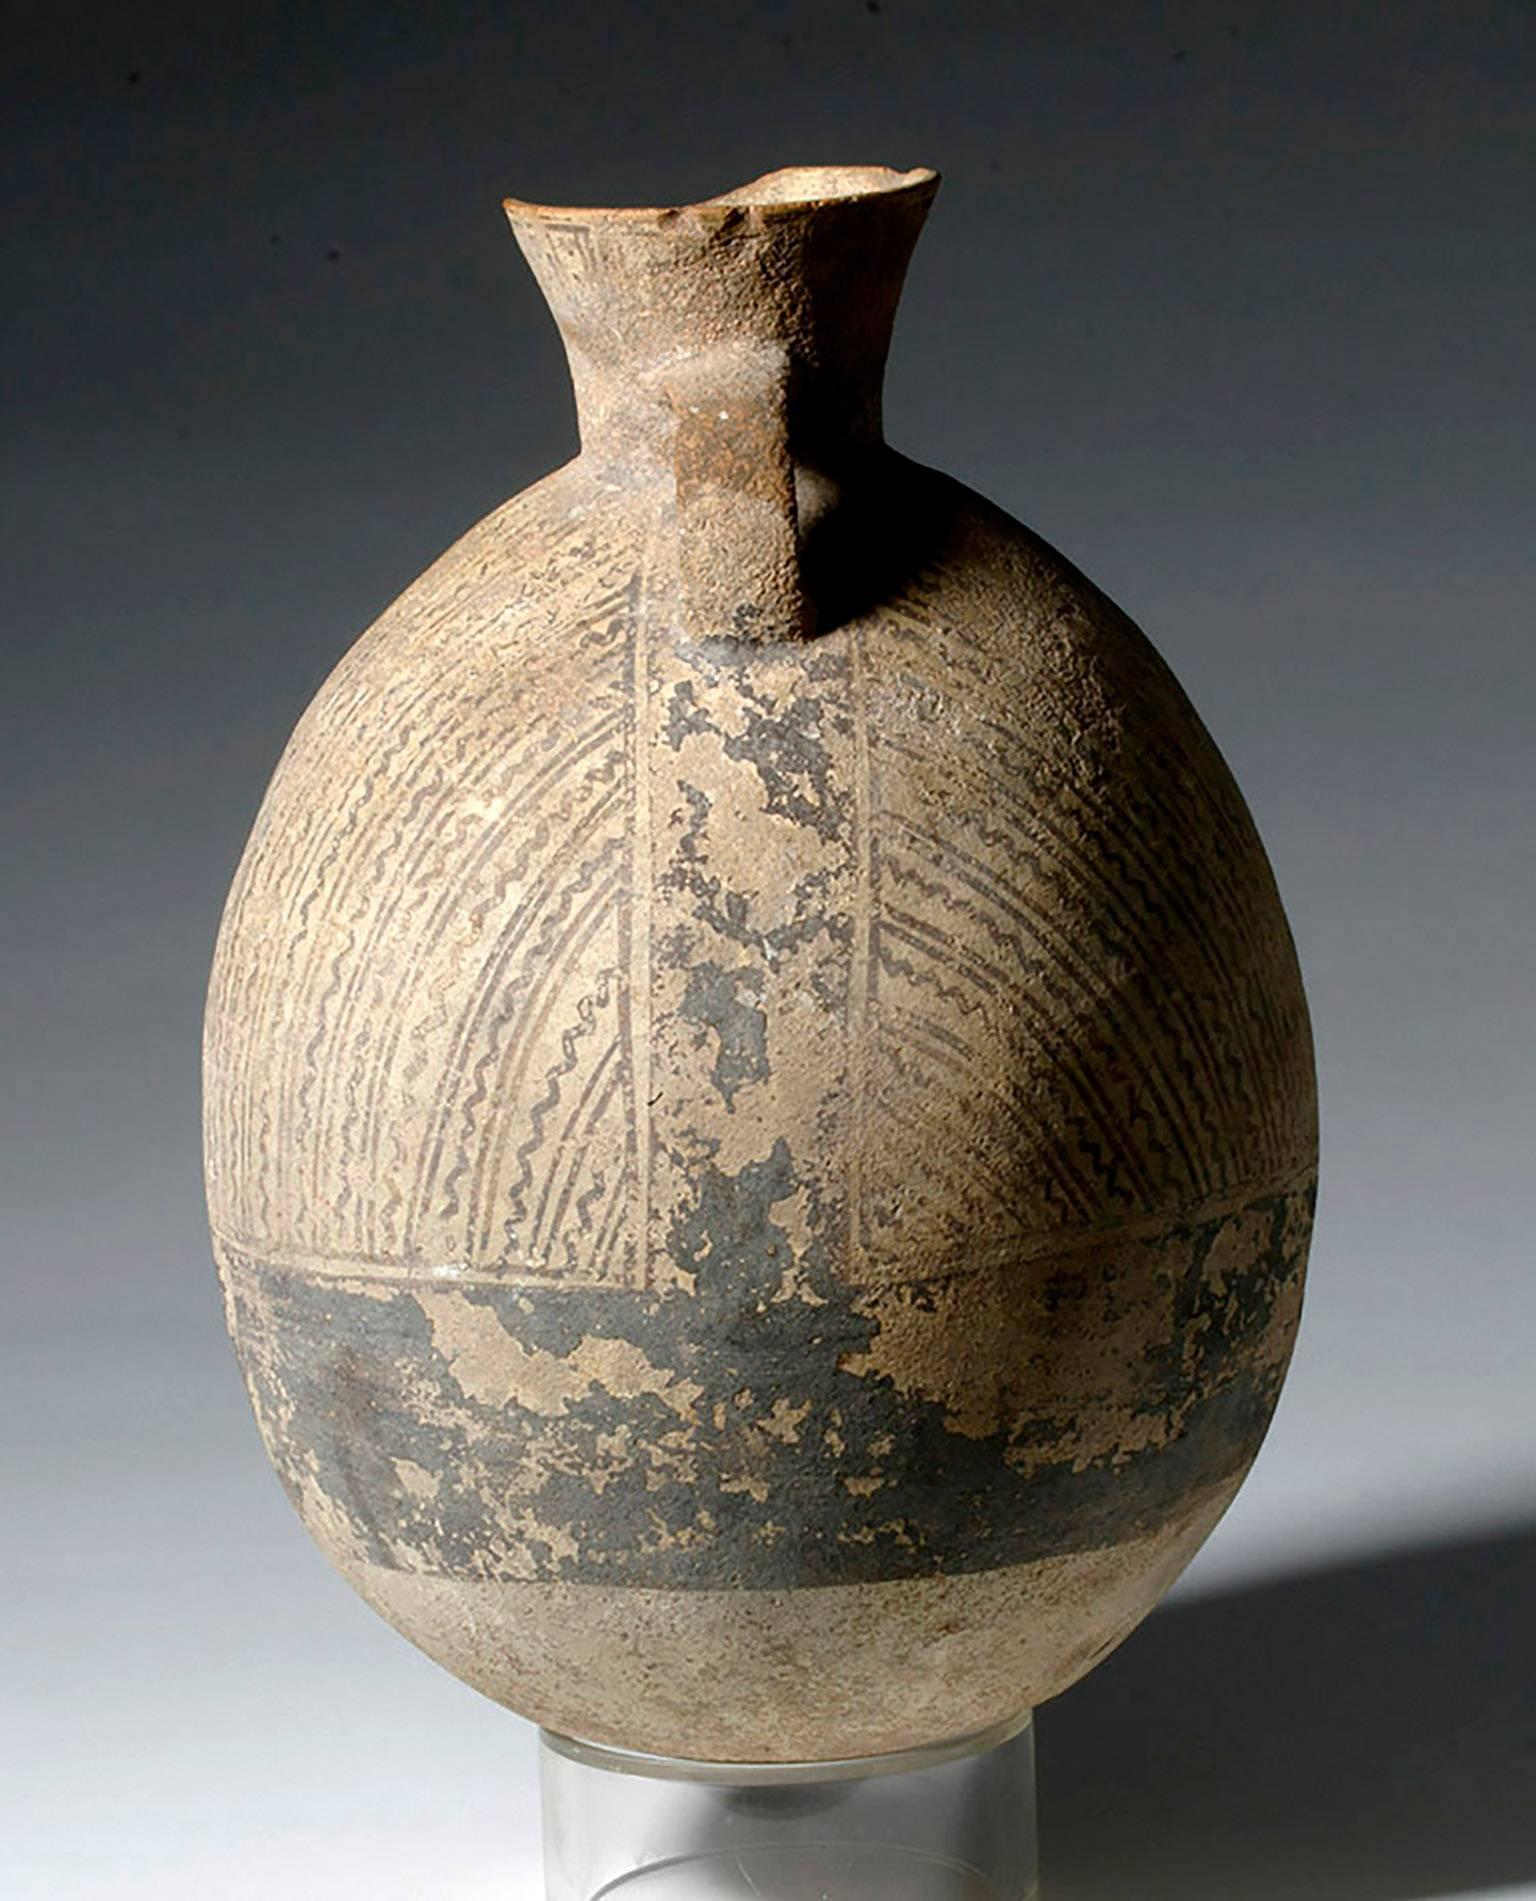 Large Pre-Columbian Pottery, Chancay culture, Peru, ca. 1200 to 1450 CE. This is a large round olla in the classic Chancay style, with linear decorations and a wide dark band painted around the base. There is an animal with four legs, prominent